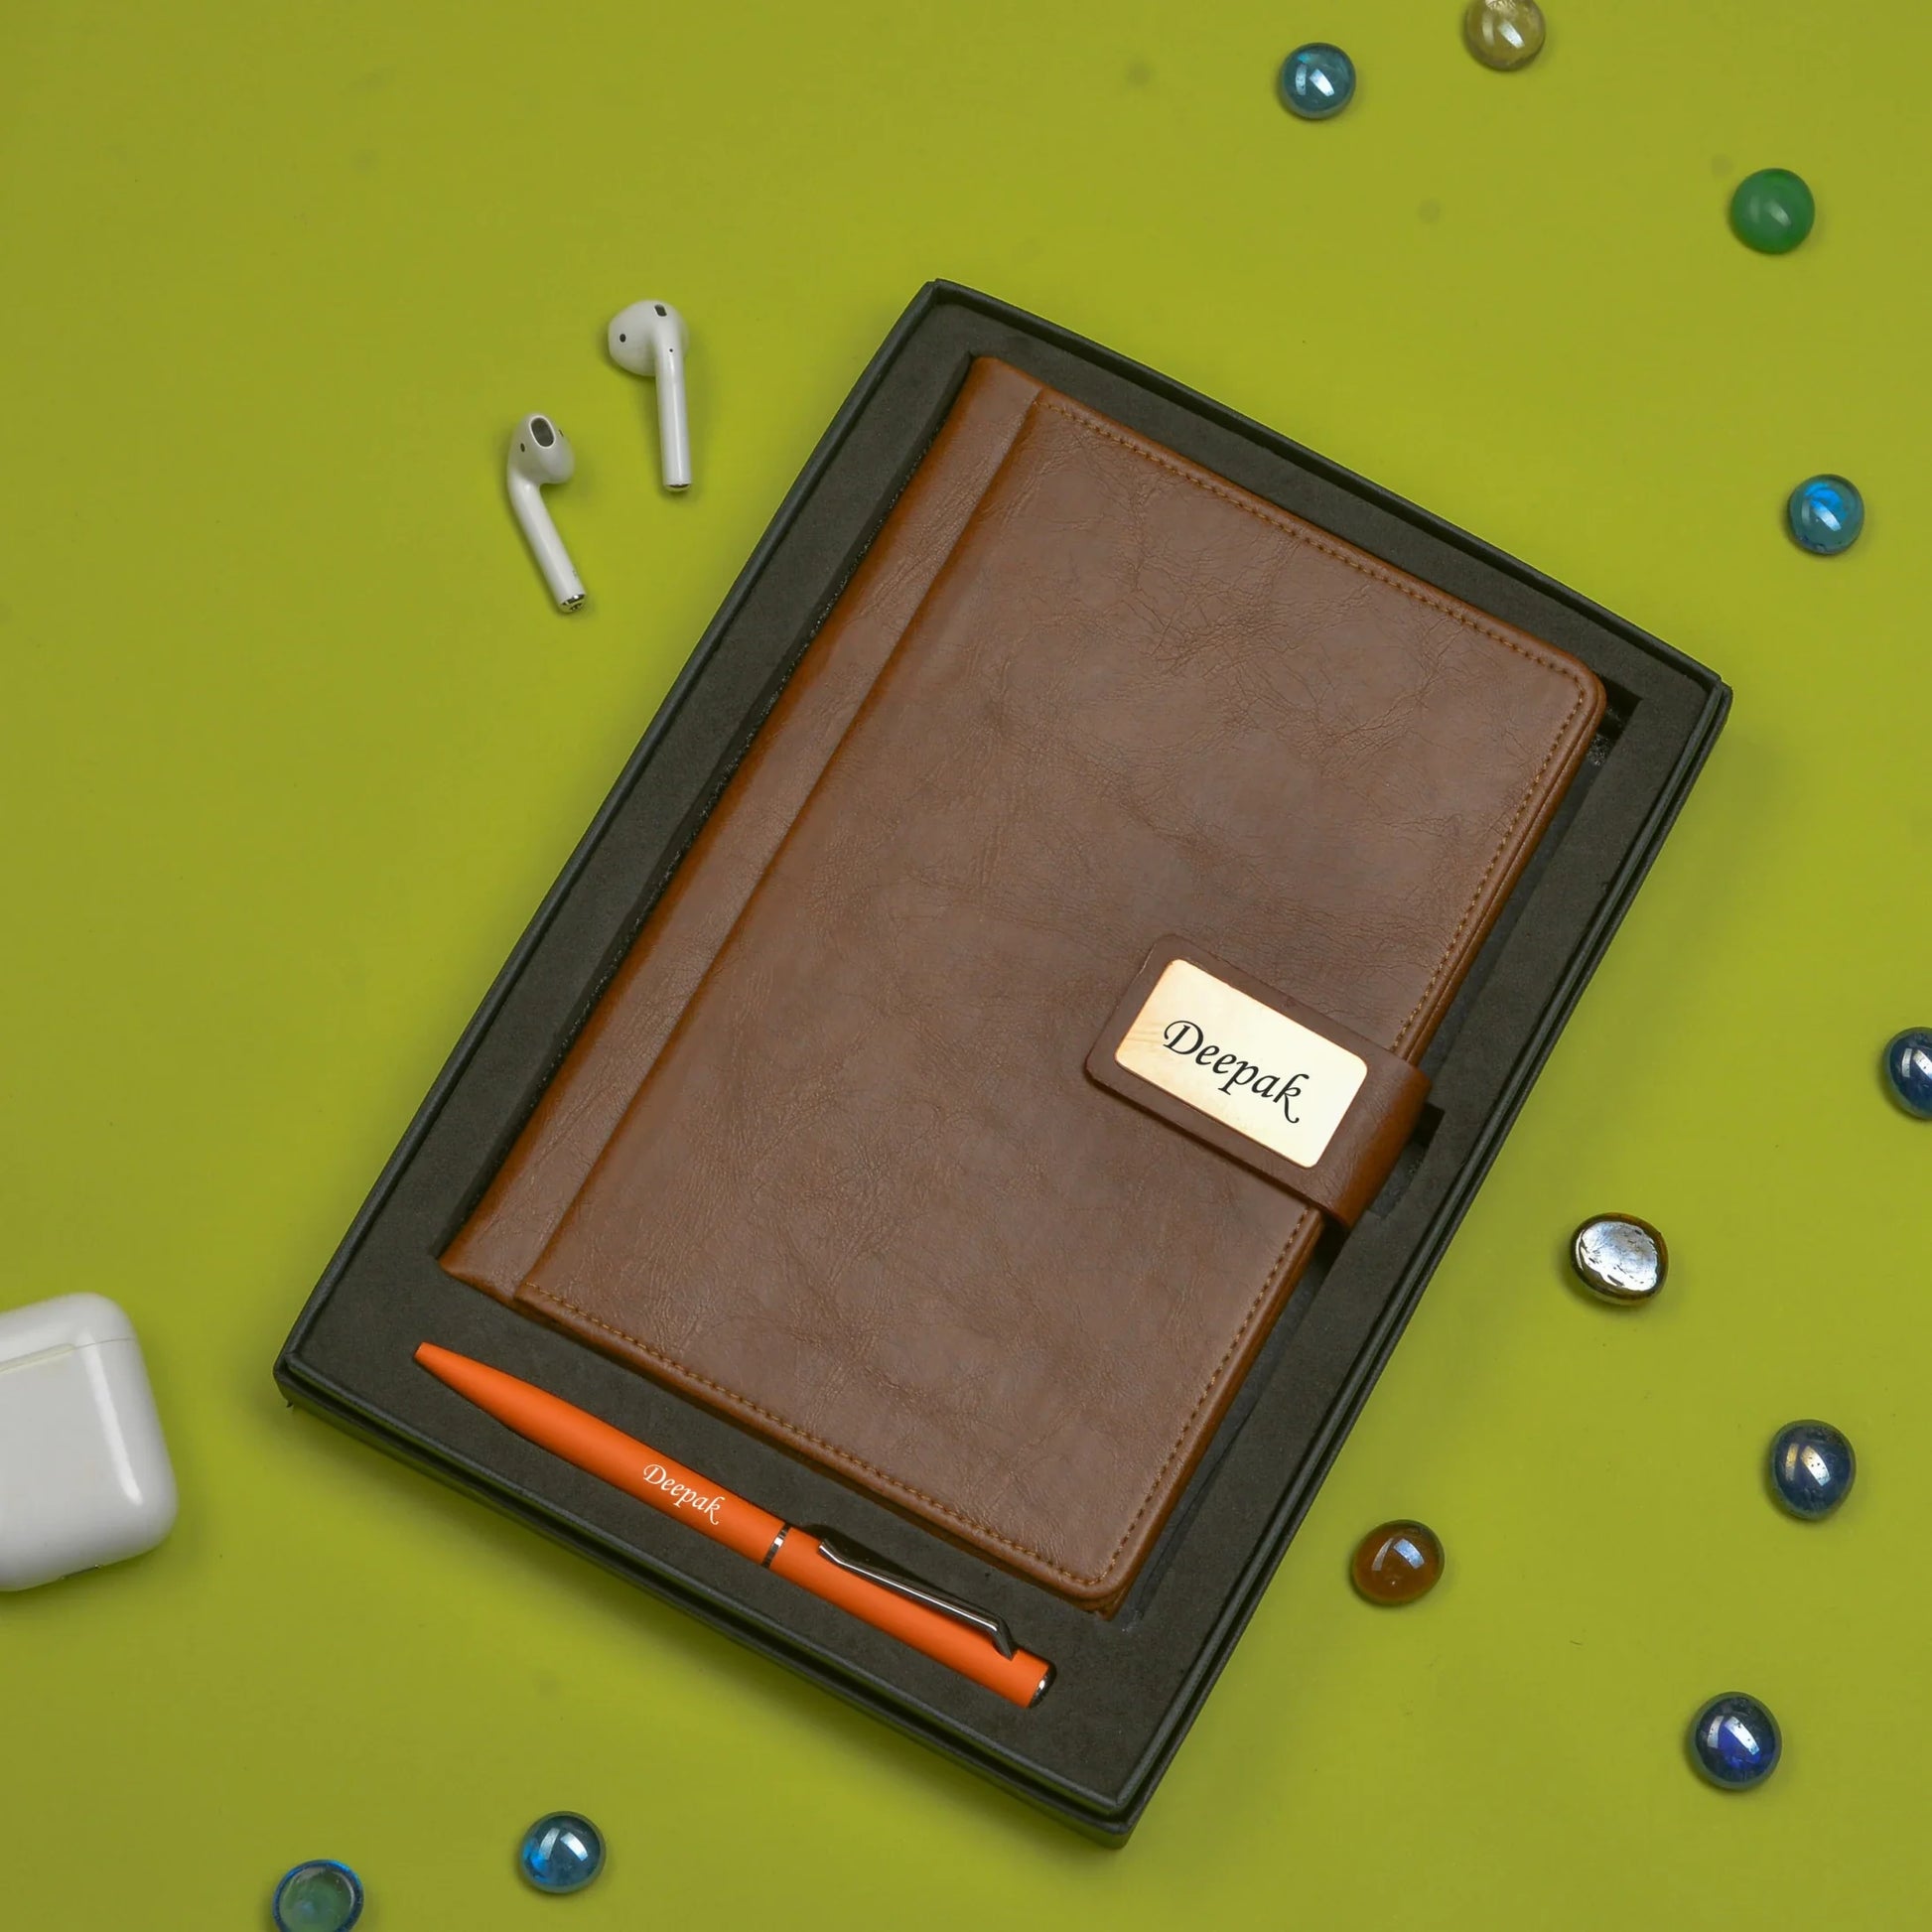 "Stay ahead of the curve with our innovative diary and pen combo. Designed for maximum efficiency and convenience."